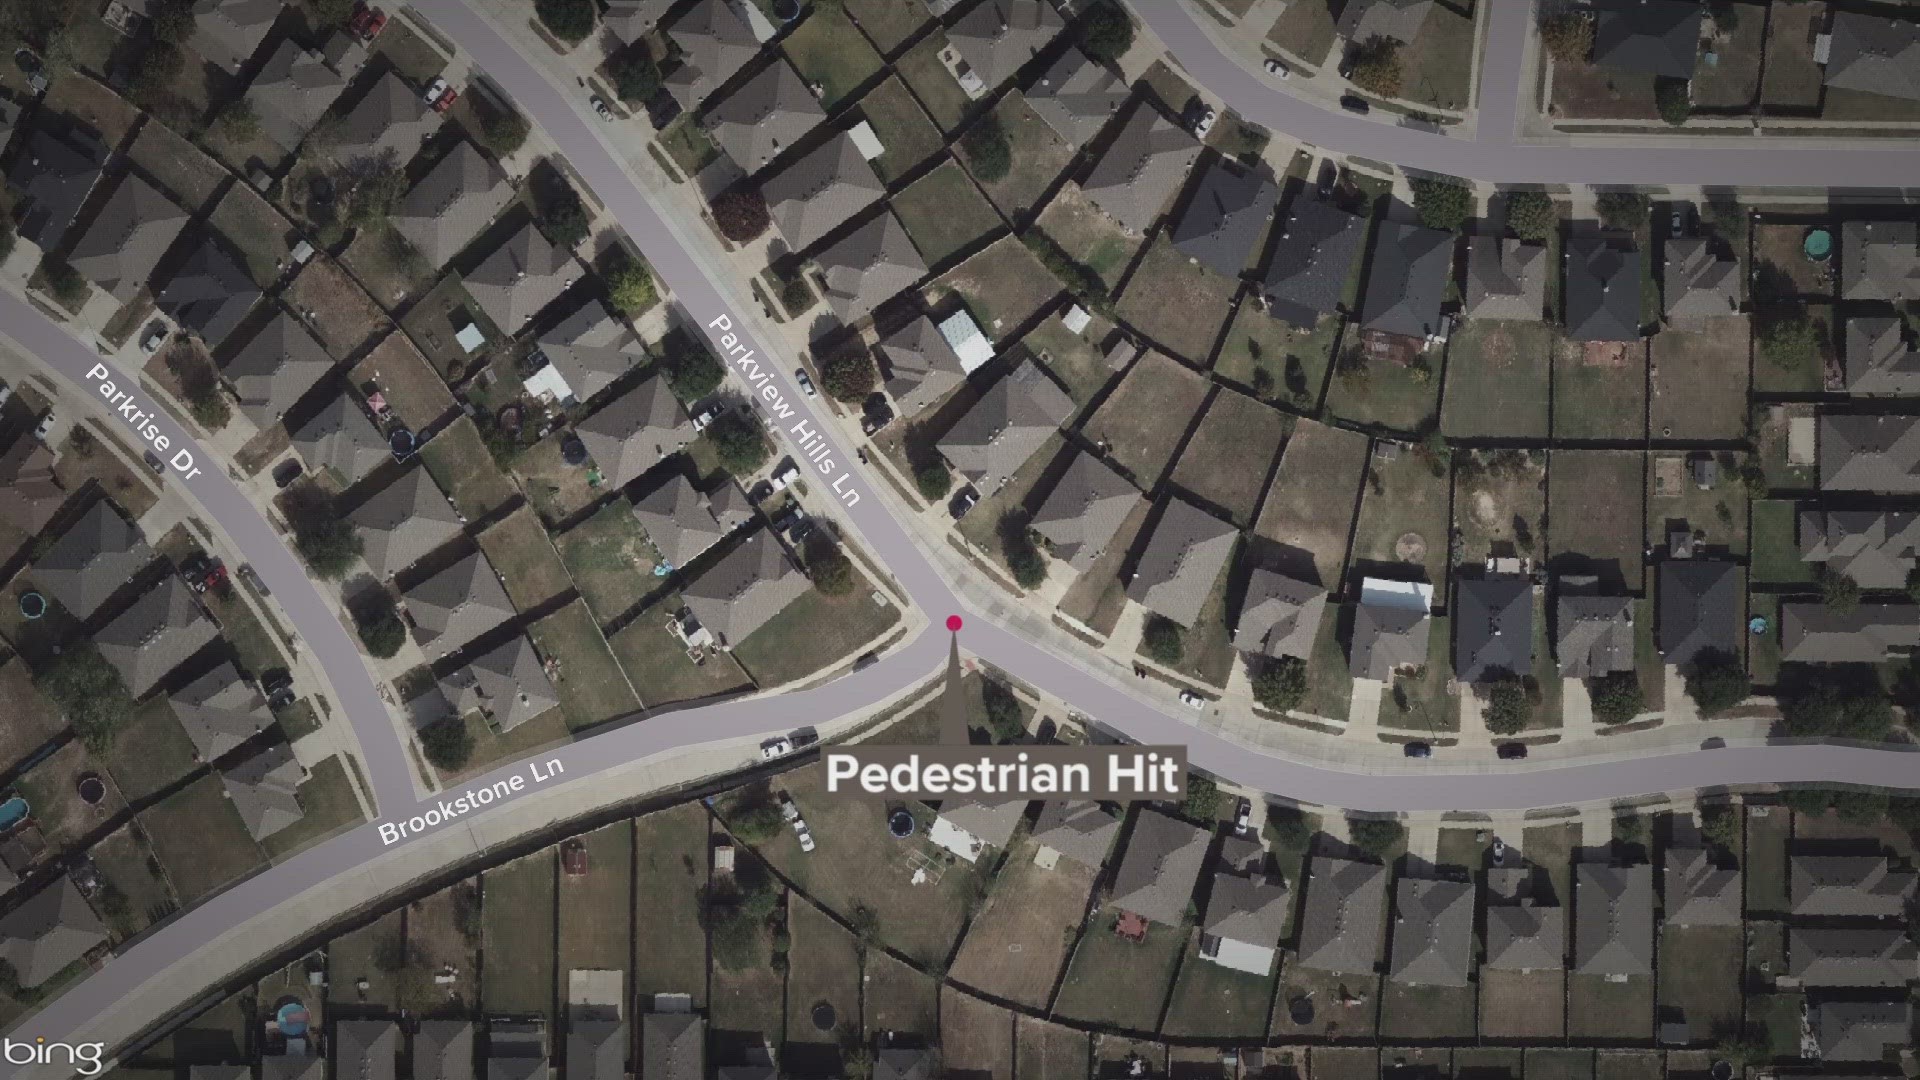 Fort Worth police said the auto-pedestrian crash happened just before 7 a.m. Saturday.